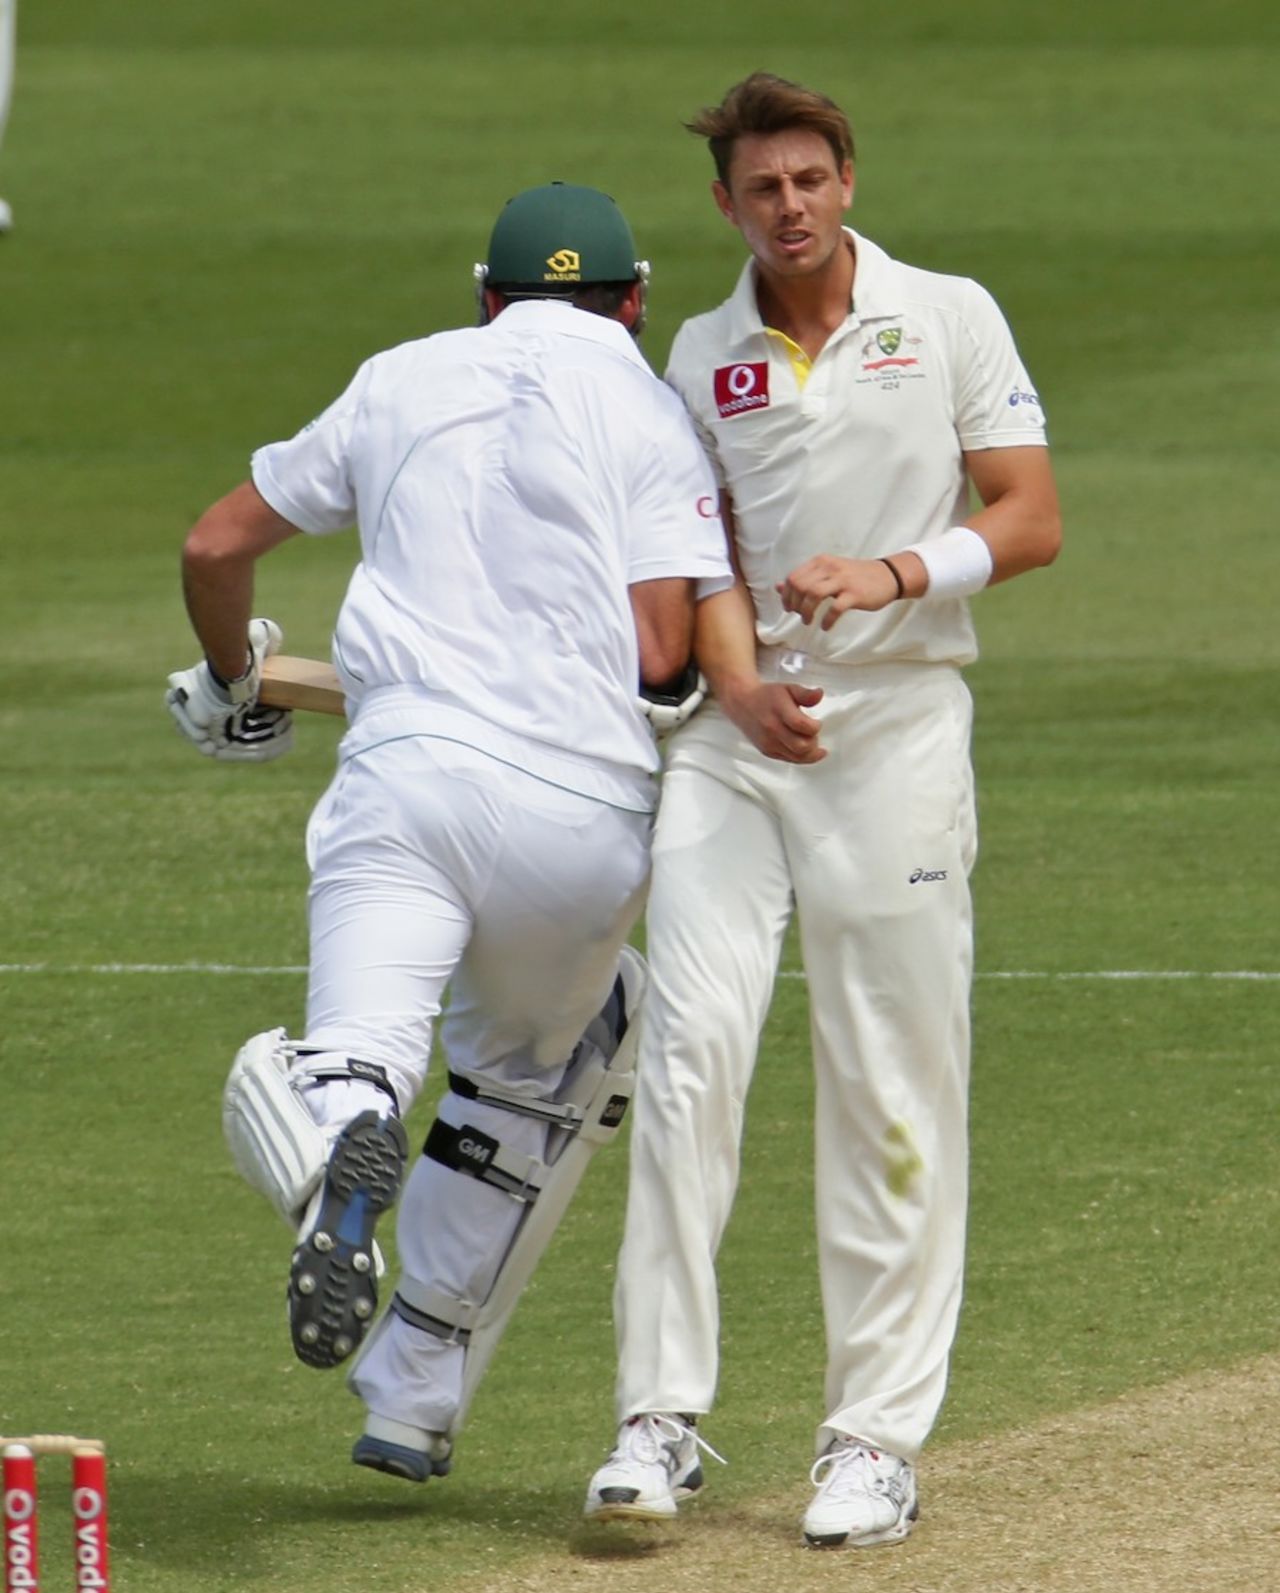 Graeme Smith and James Pattinson brush against each other, Australia v South Africa, 2nd Test, Adelaide, 2nd day, November 23, 2012